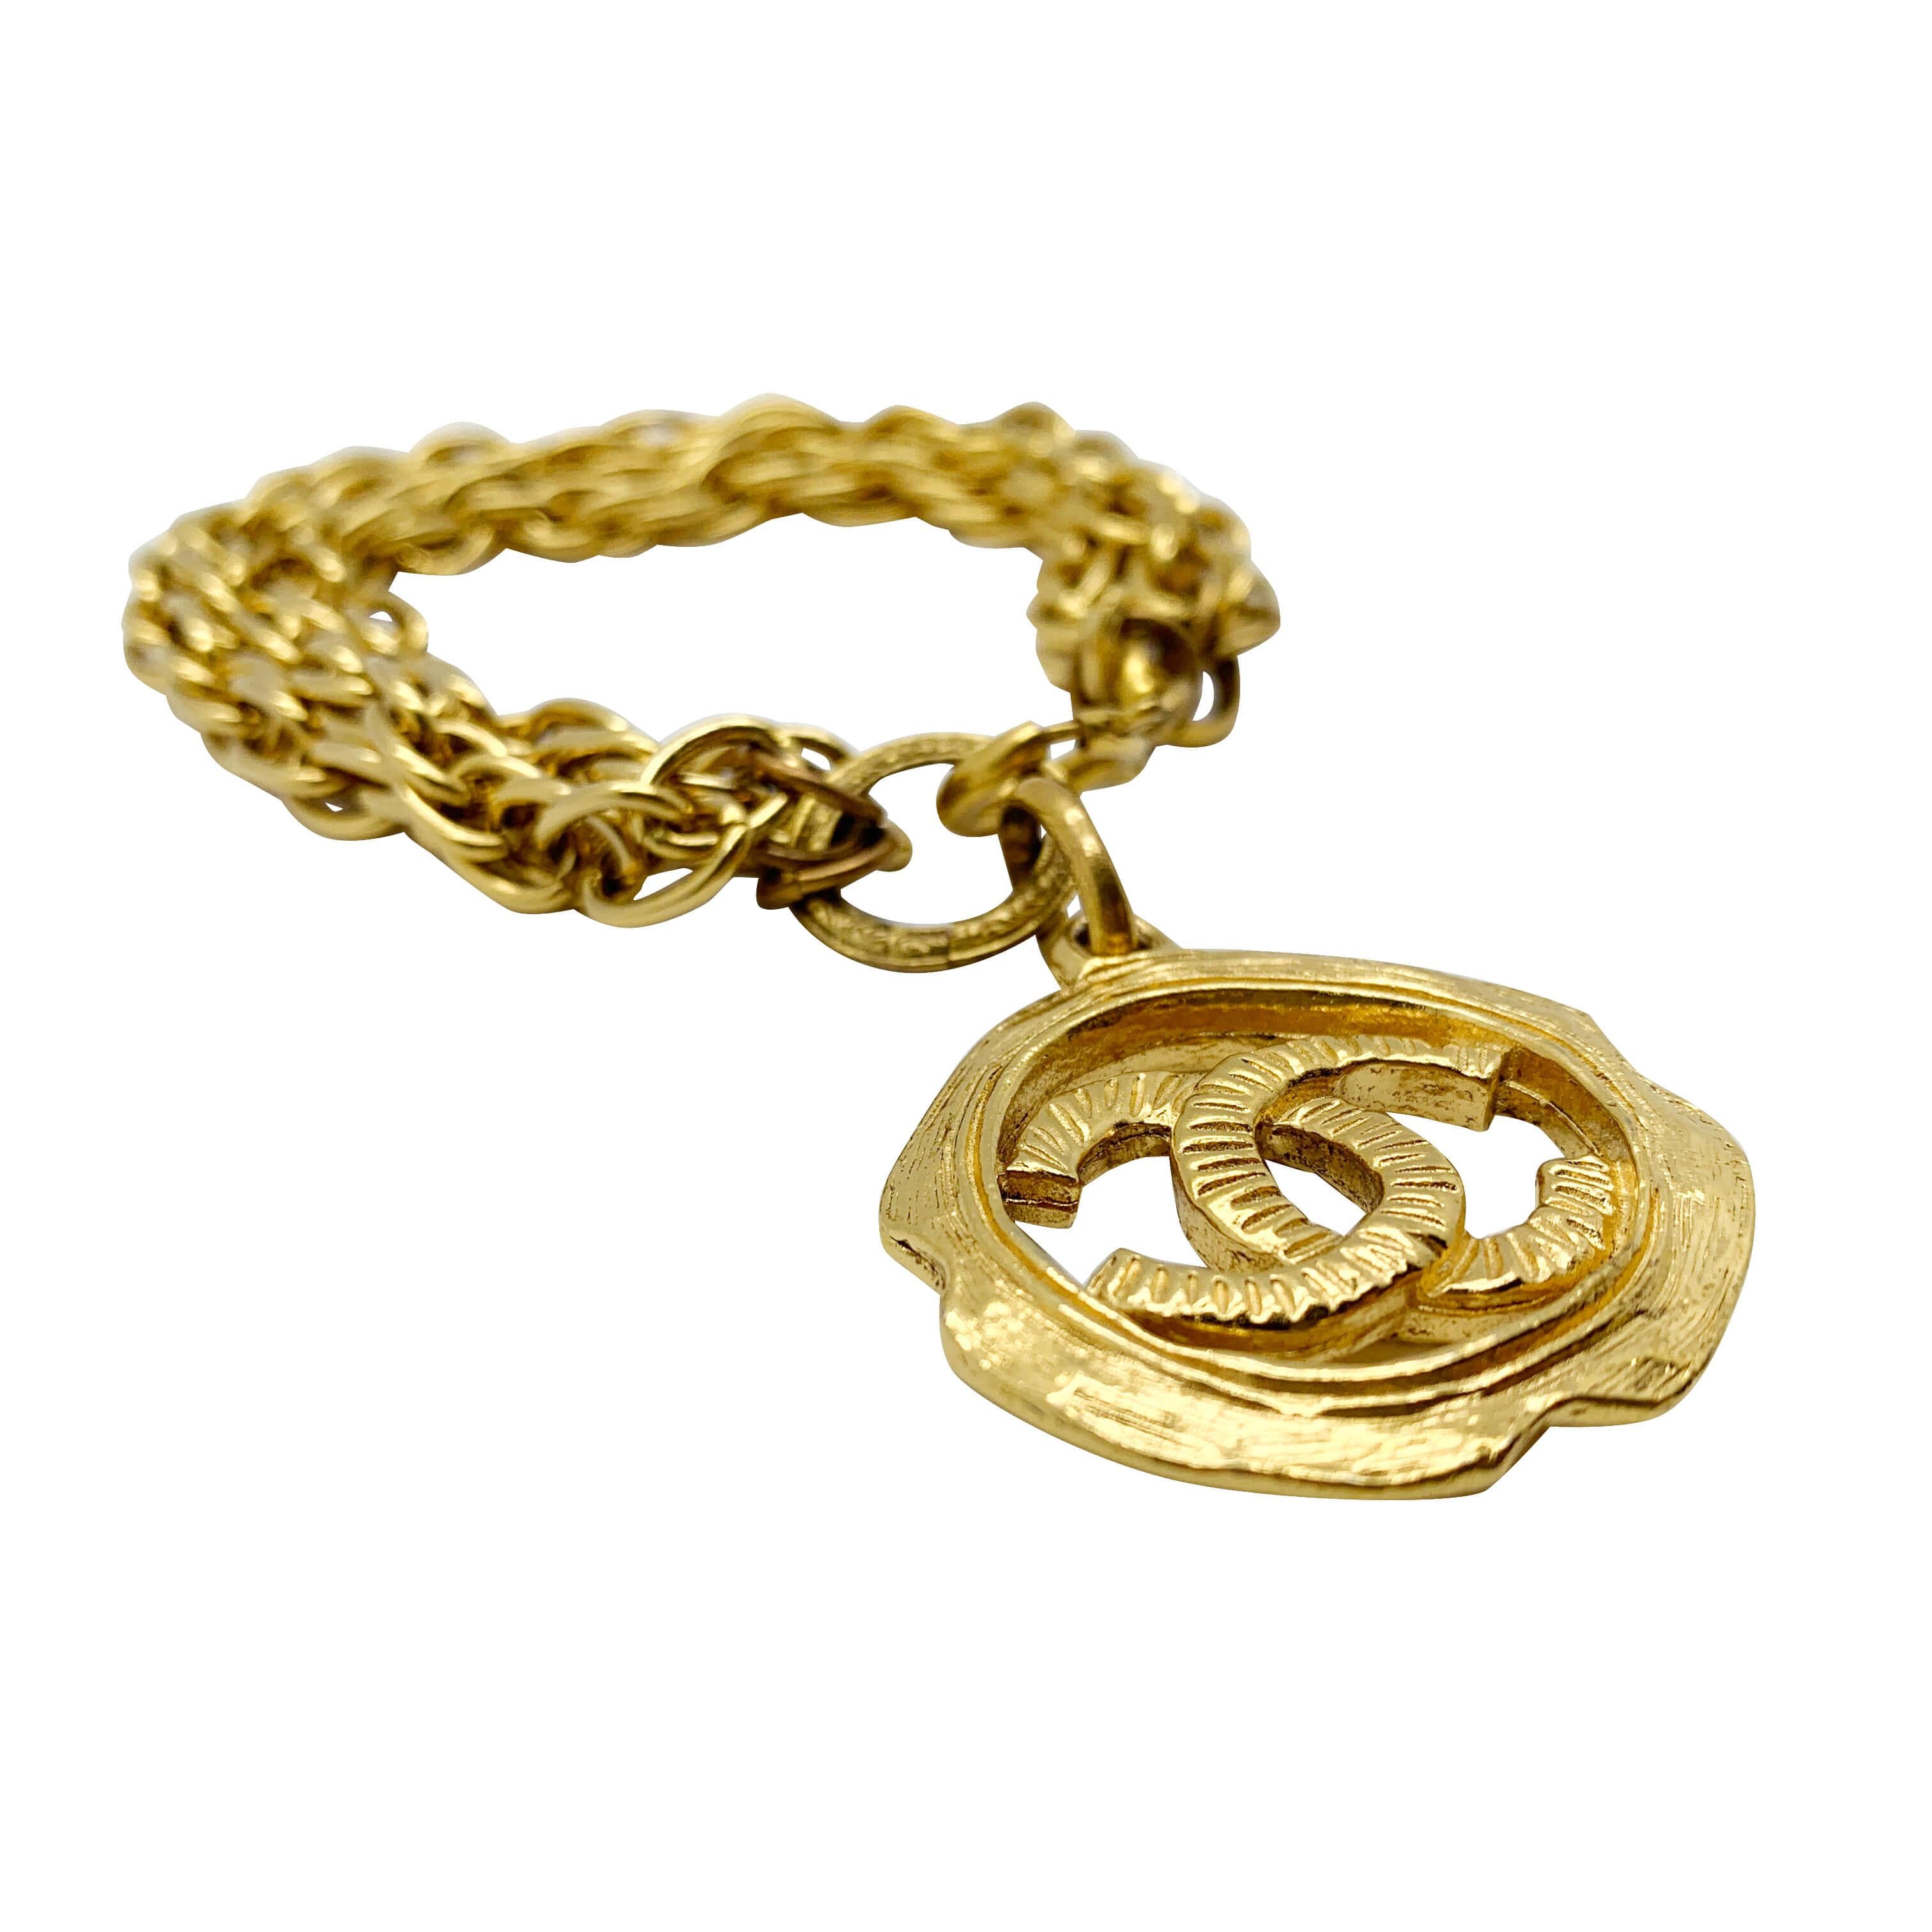 Vintage Chanel Chain Logo Charm Bracelet by Karl Lagerfeld 1980s For Sale 1